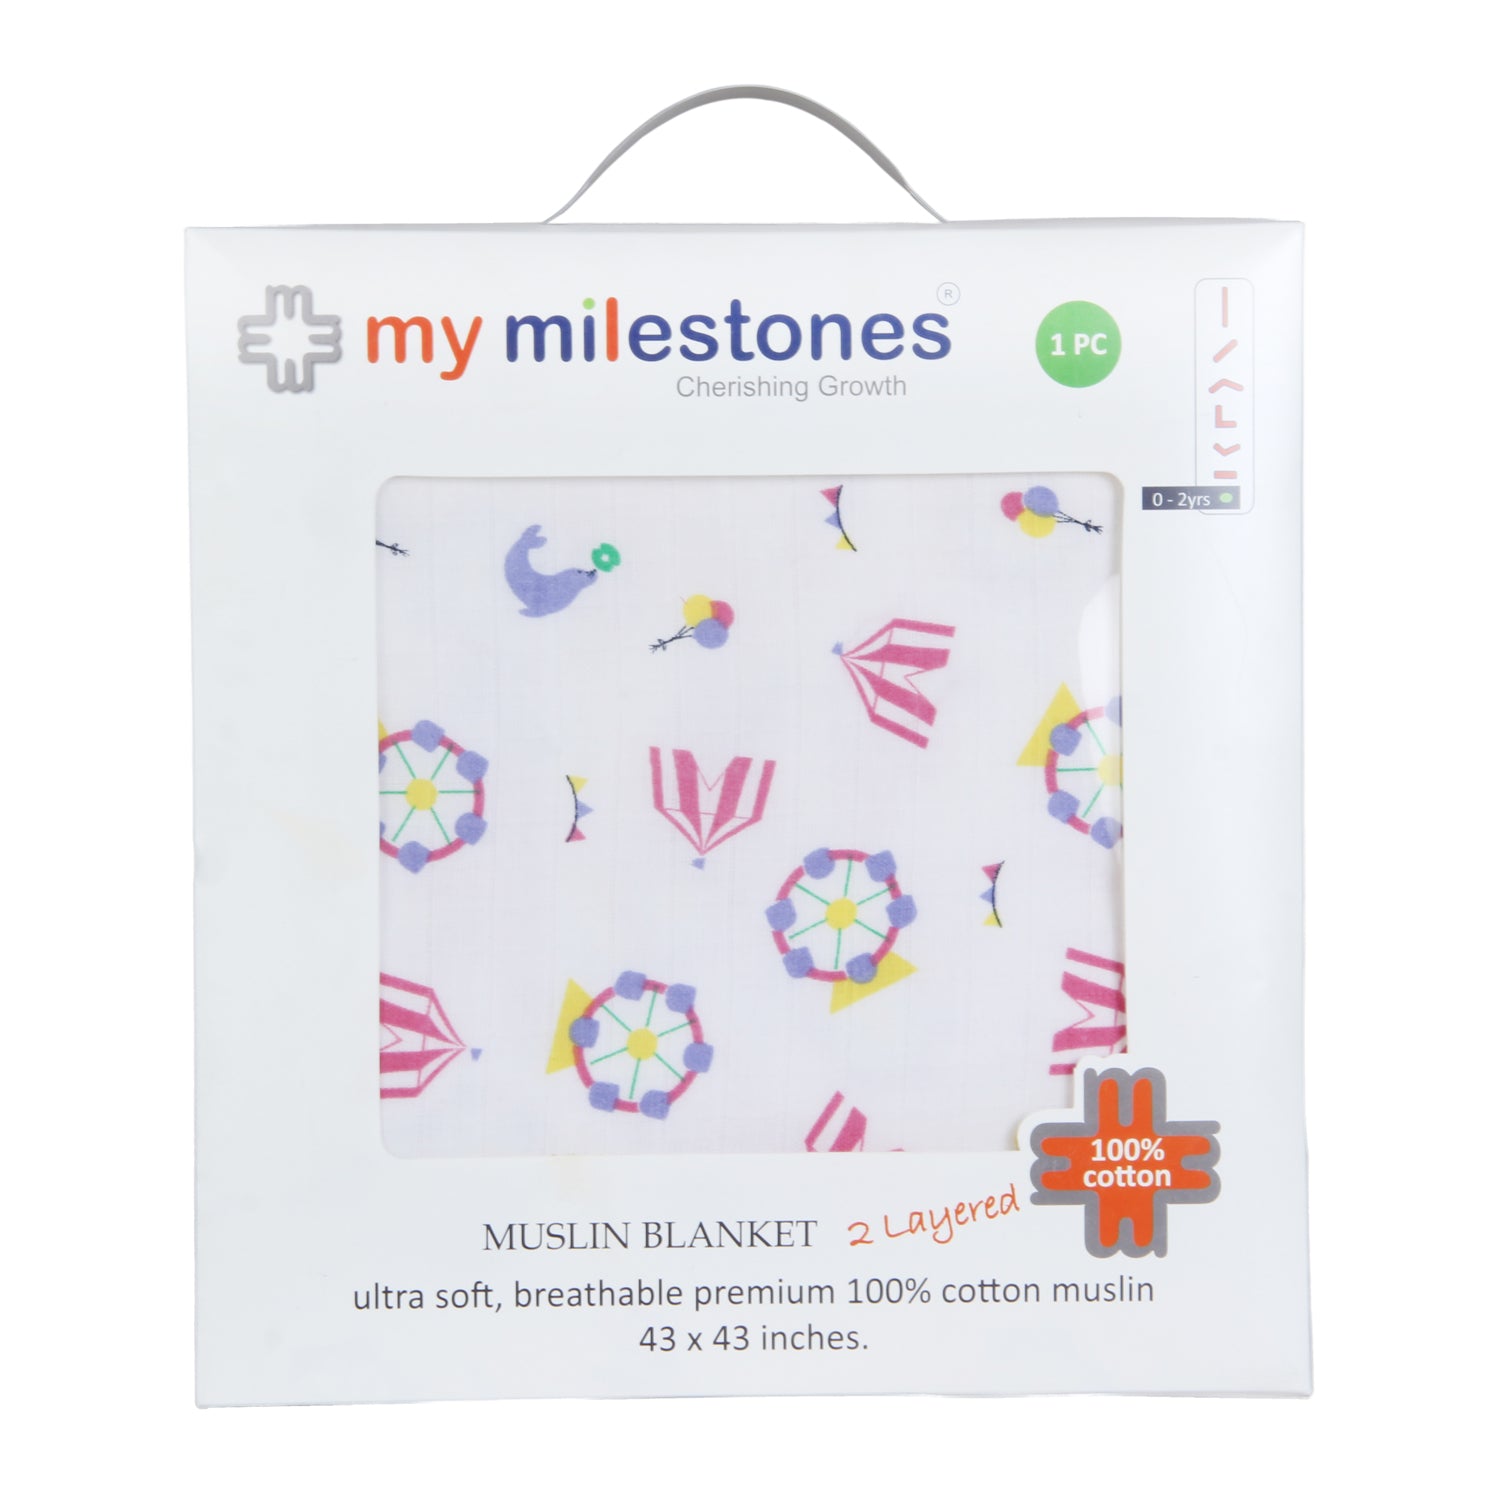 My Milestones 100% Cotton Muslin Baby Blanket - 4 Layered (43x43 inches) - Carnival Rose Pink Print